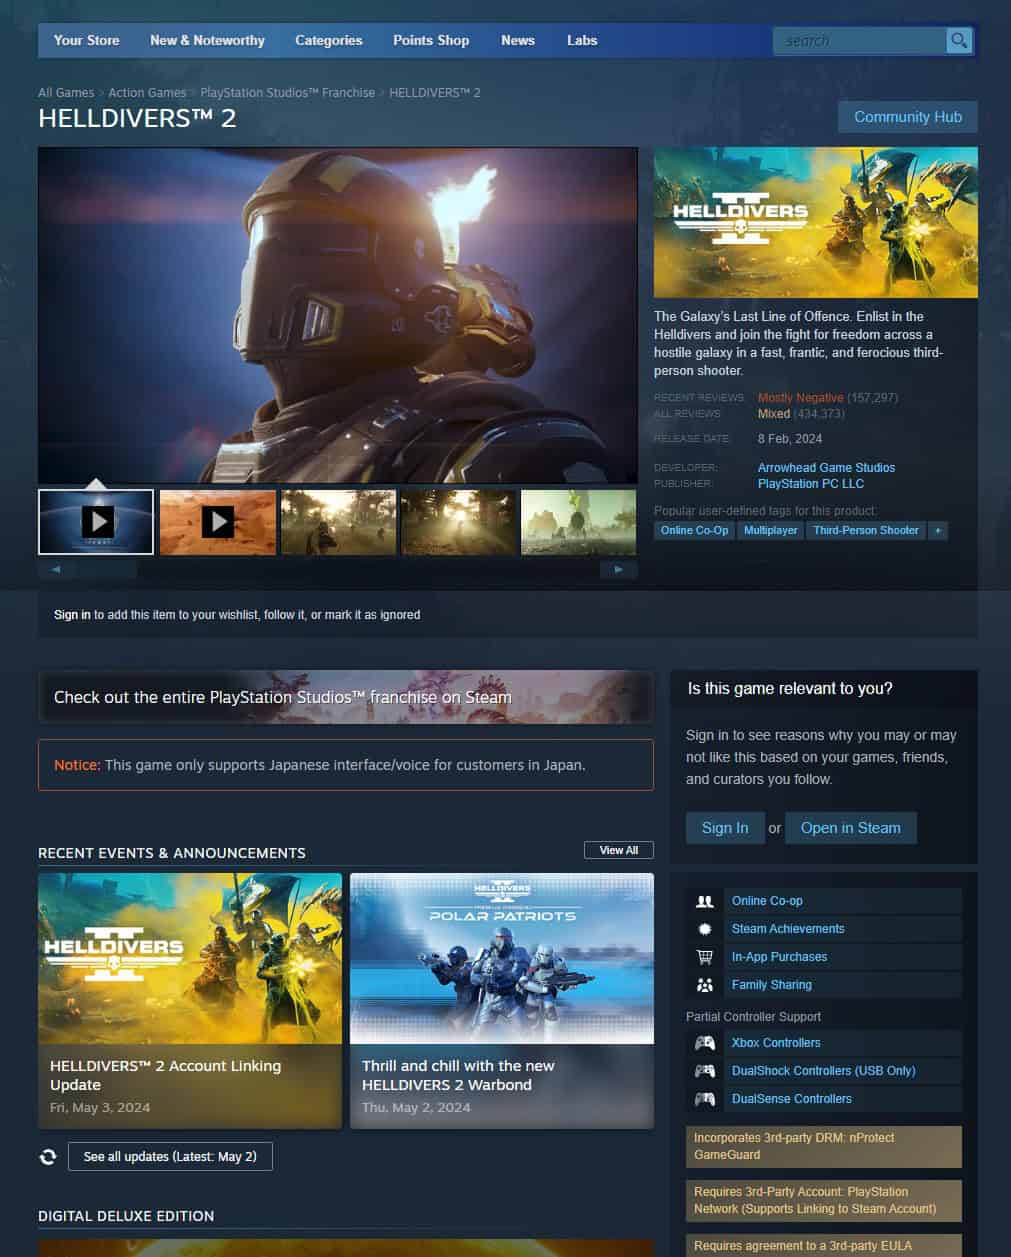 Screenshot of the "Helldivers 2" video game page on Steam featuring the game title, user interface options, and a promotional image of a character in a futuristic helmet.